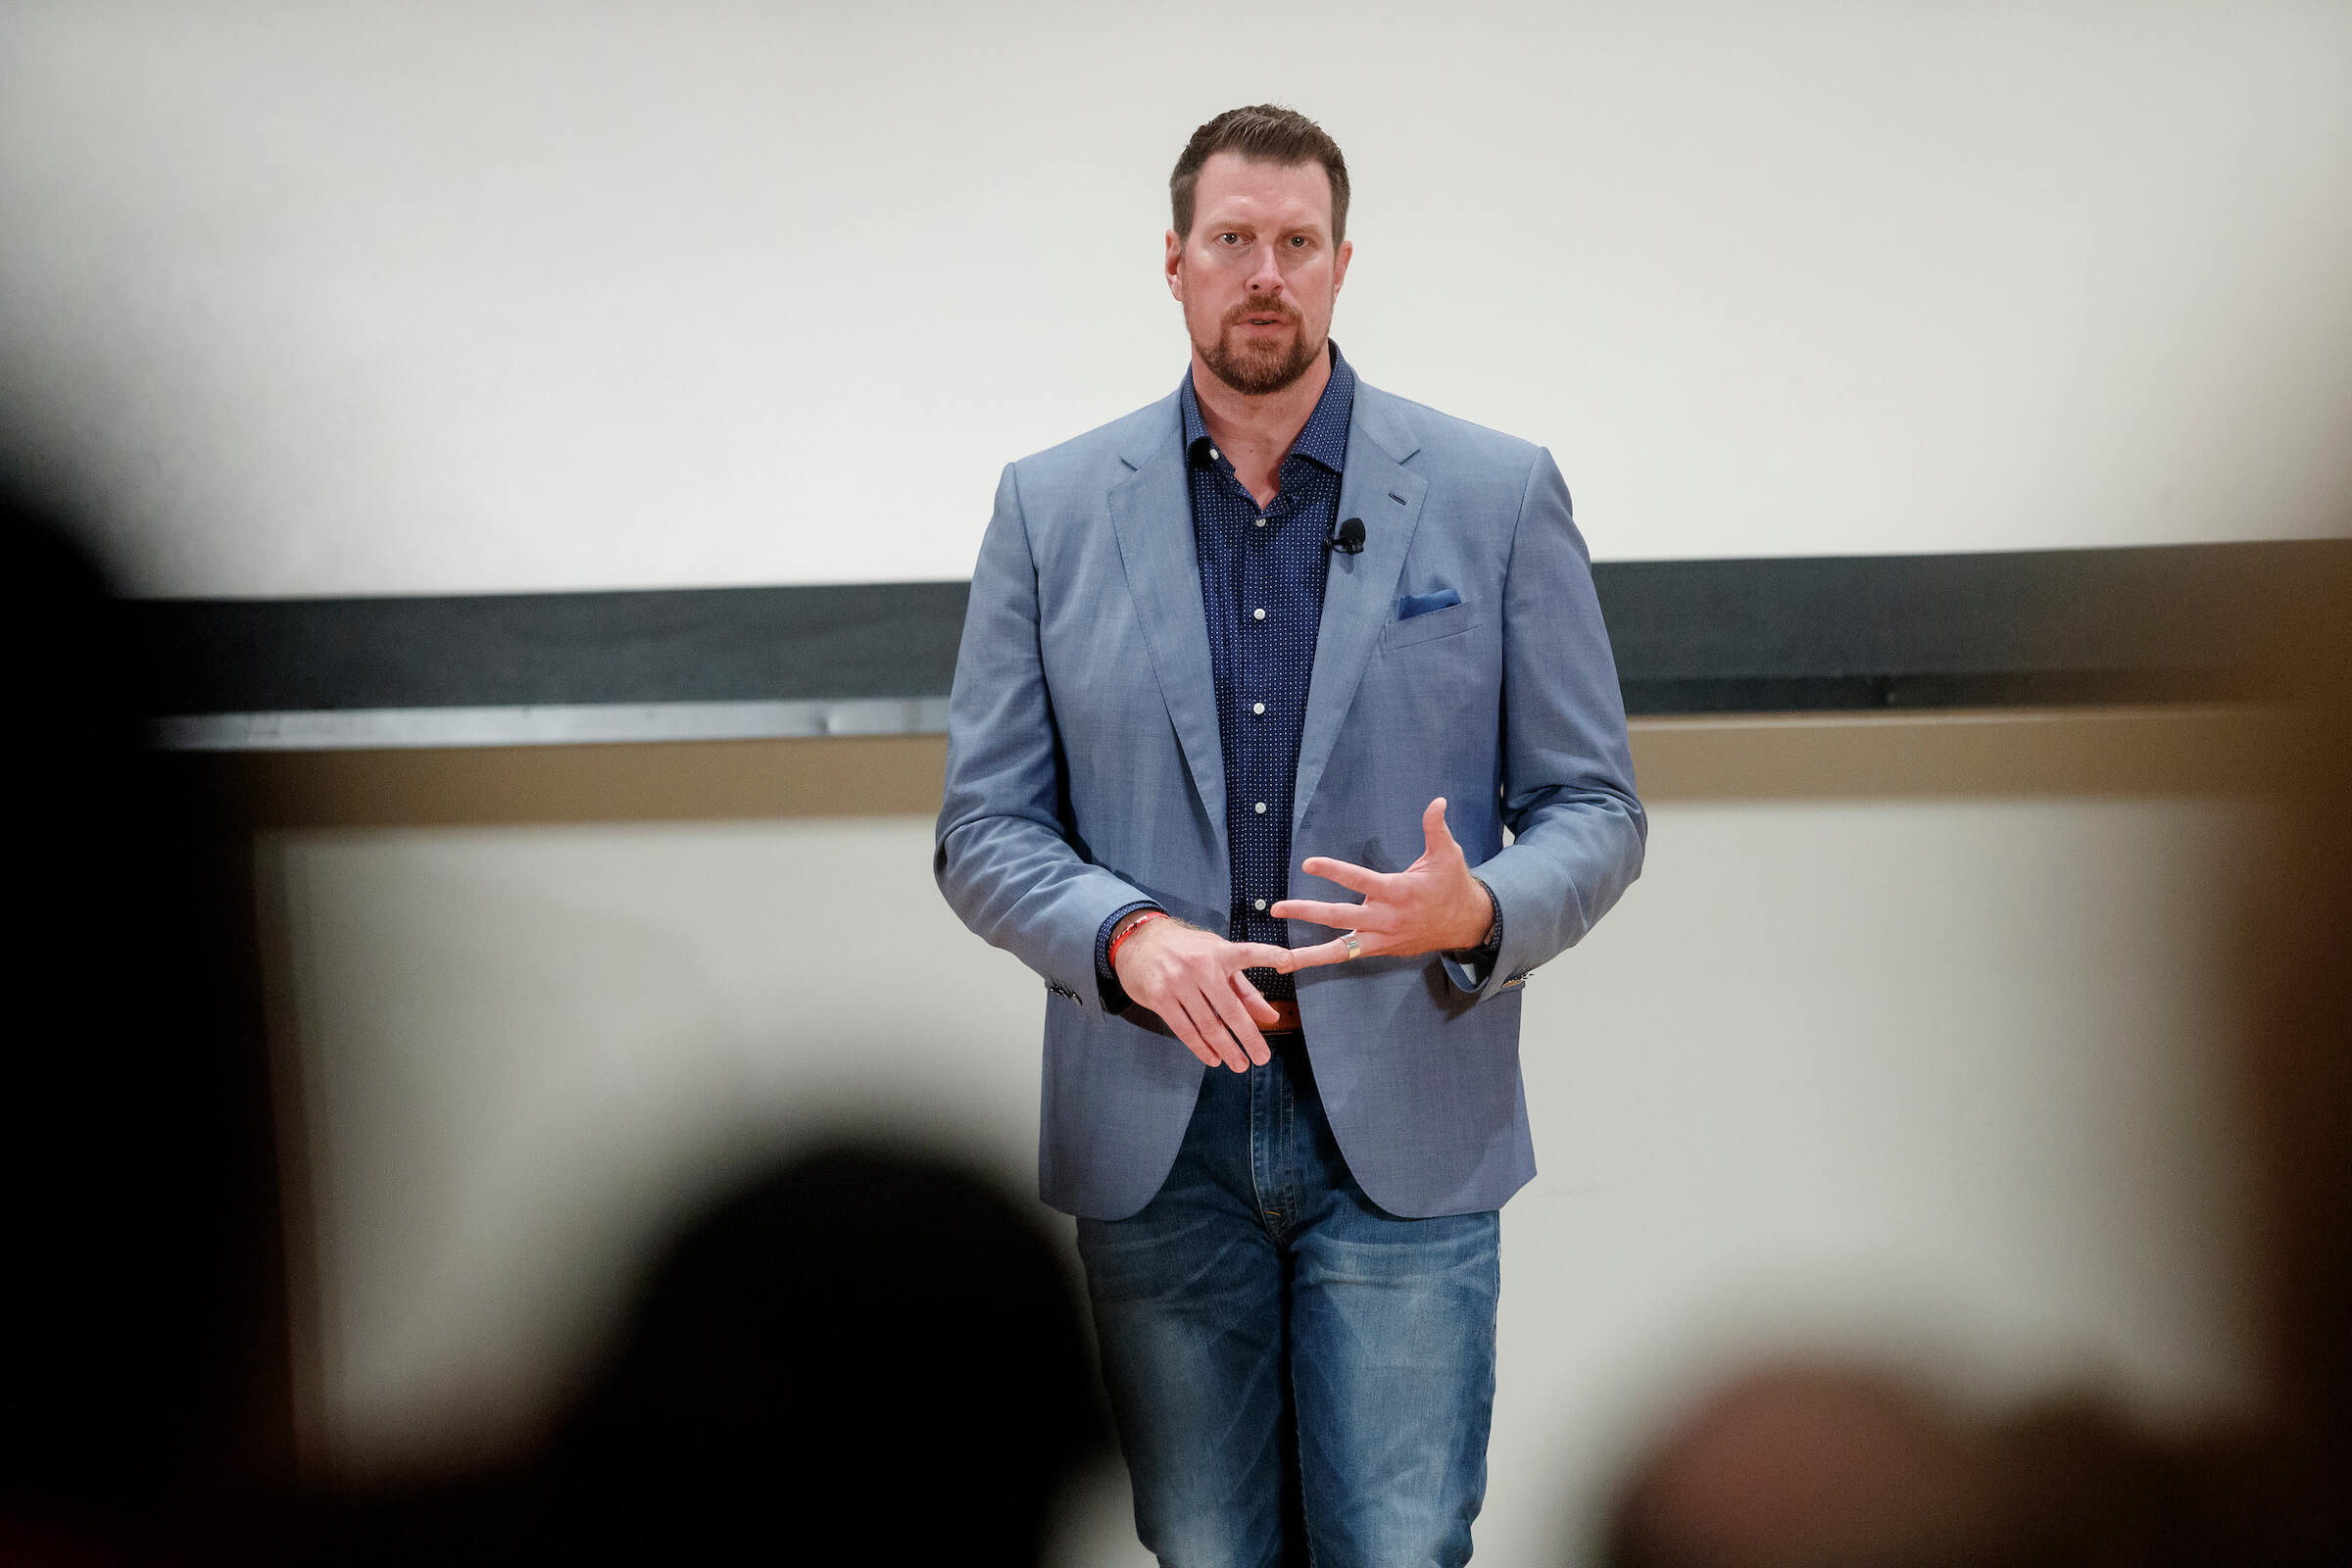 From the NFL to prison to recovery: Ryan Leaf shares his story